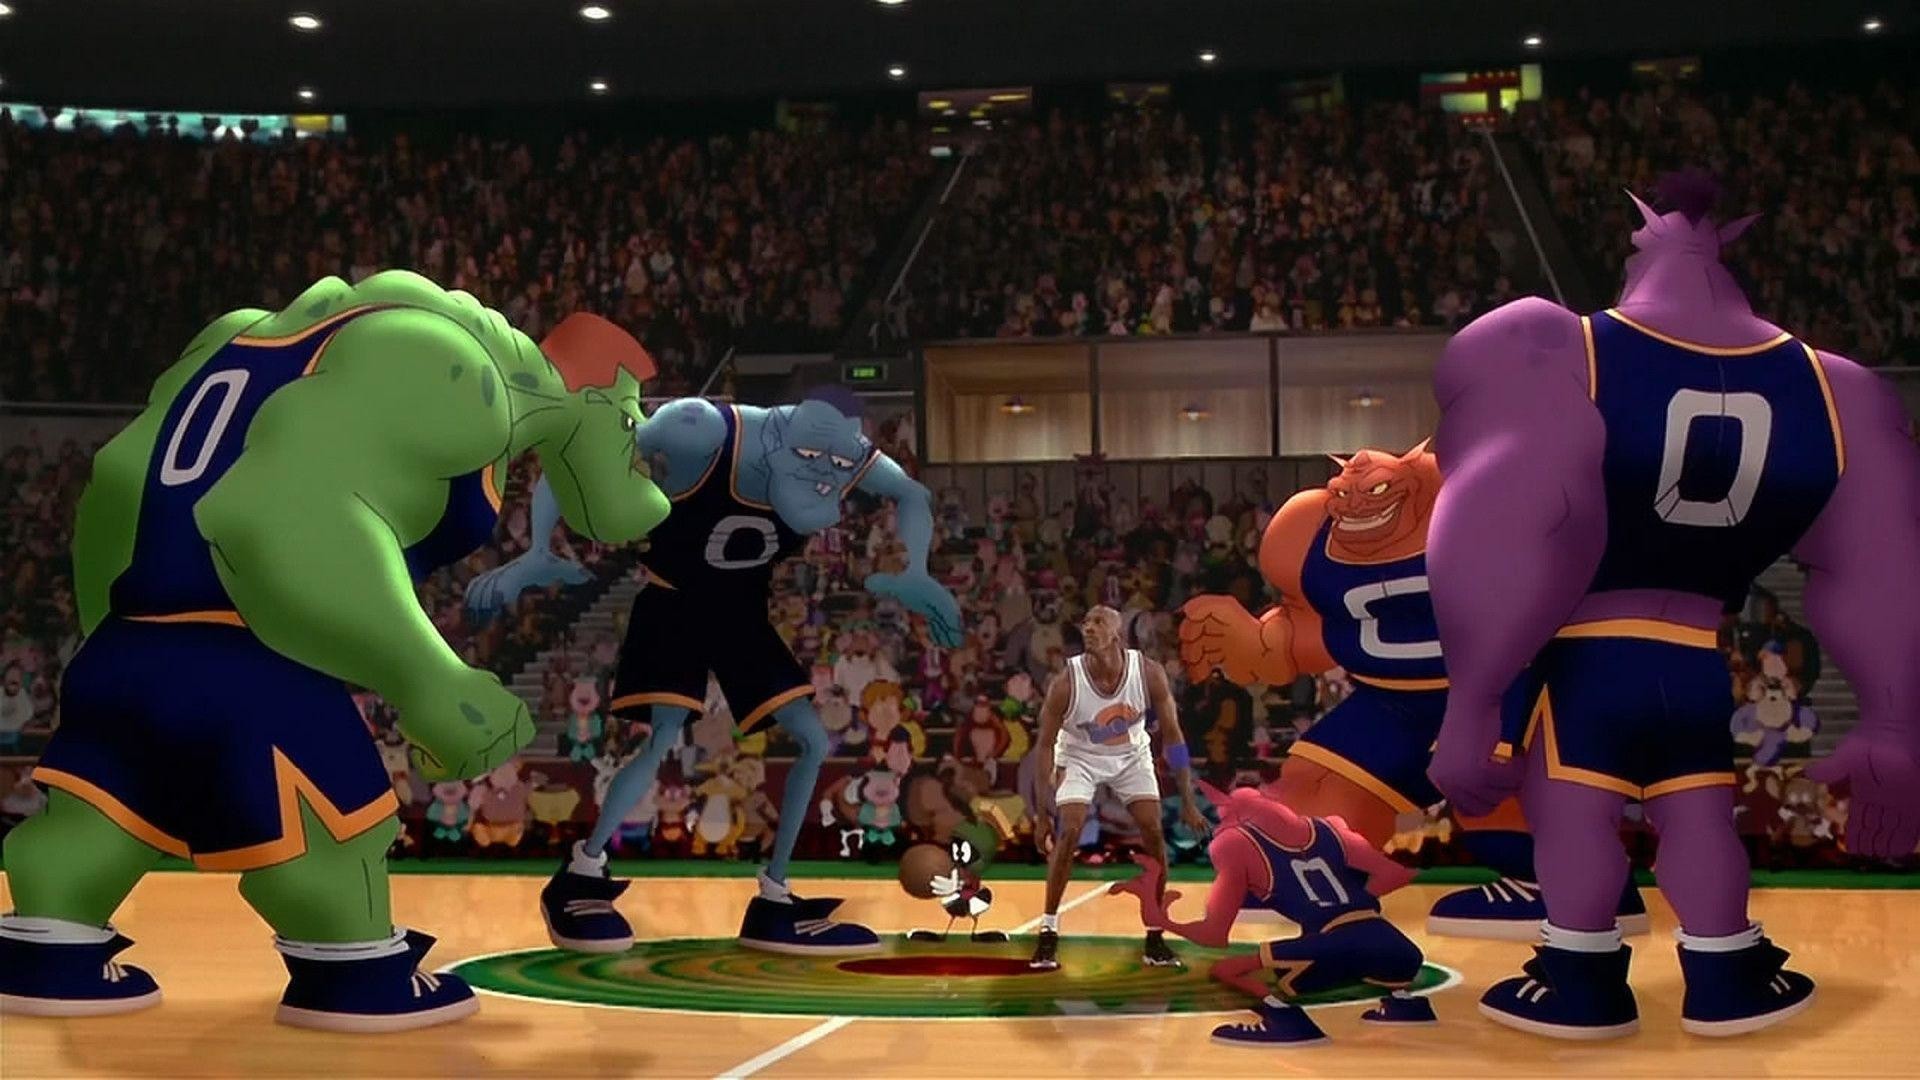 Space Jam Wallpapers 70 Pictures With tenor, maker of gif keyboard, add popular bugs bunny animated gifs to your conversations. space jam wallpapers 70 pictures